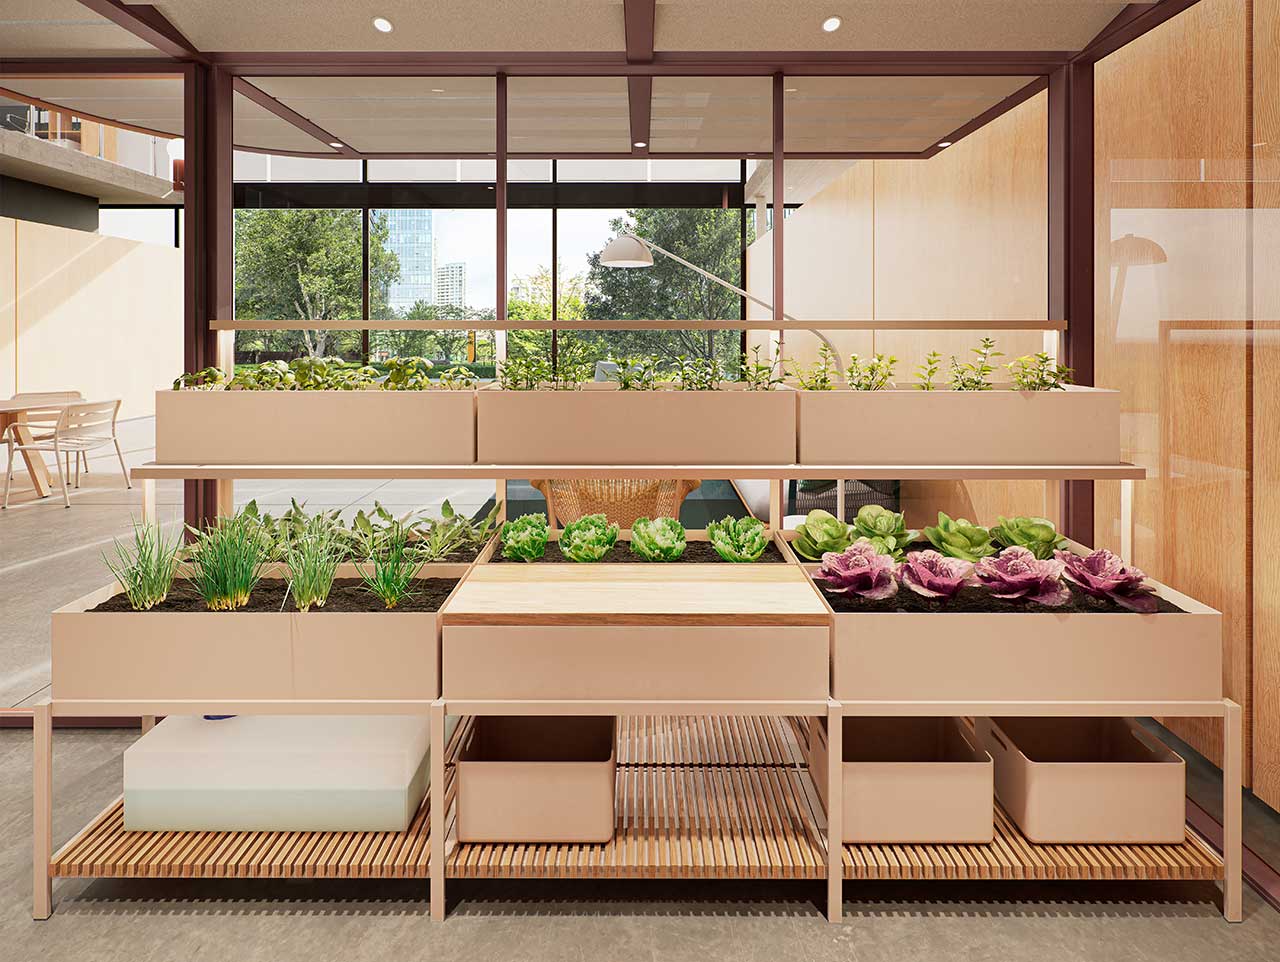 Foster a More Sustainable Future With the Hydroponic Garden